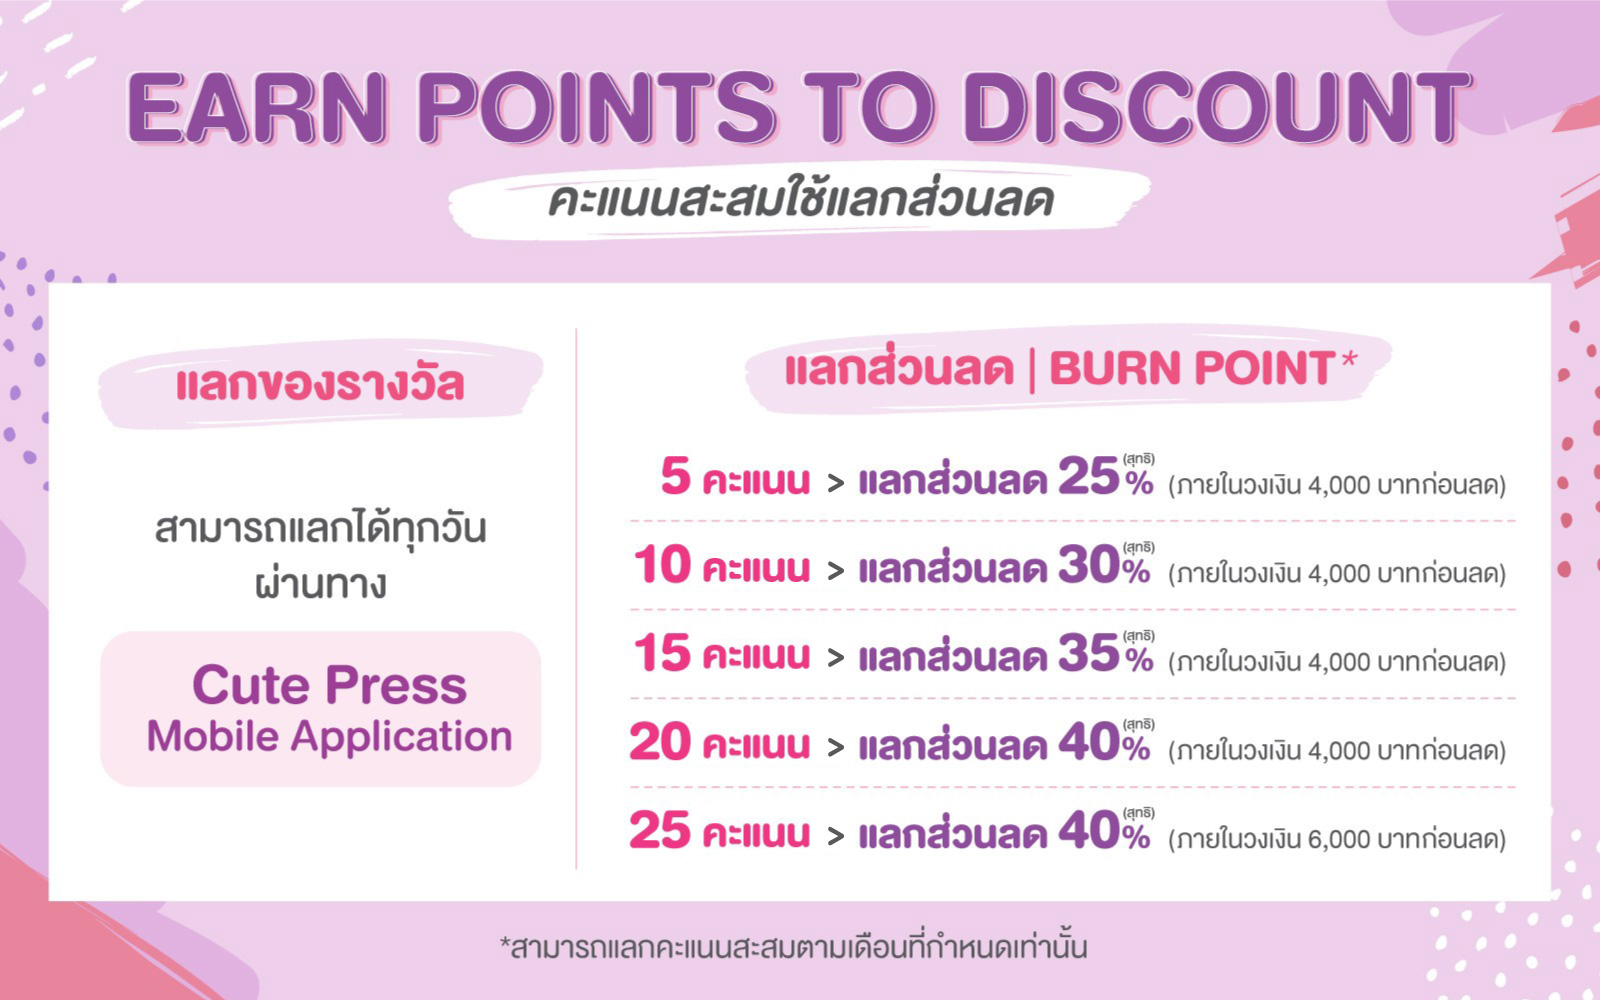 Earn Points to Discount